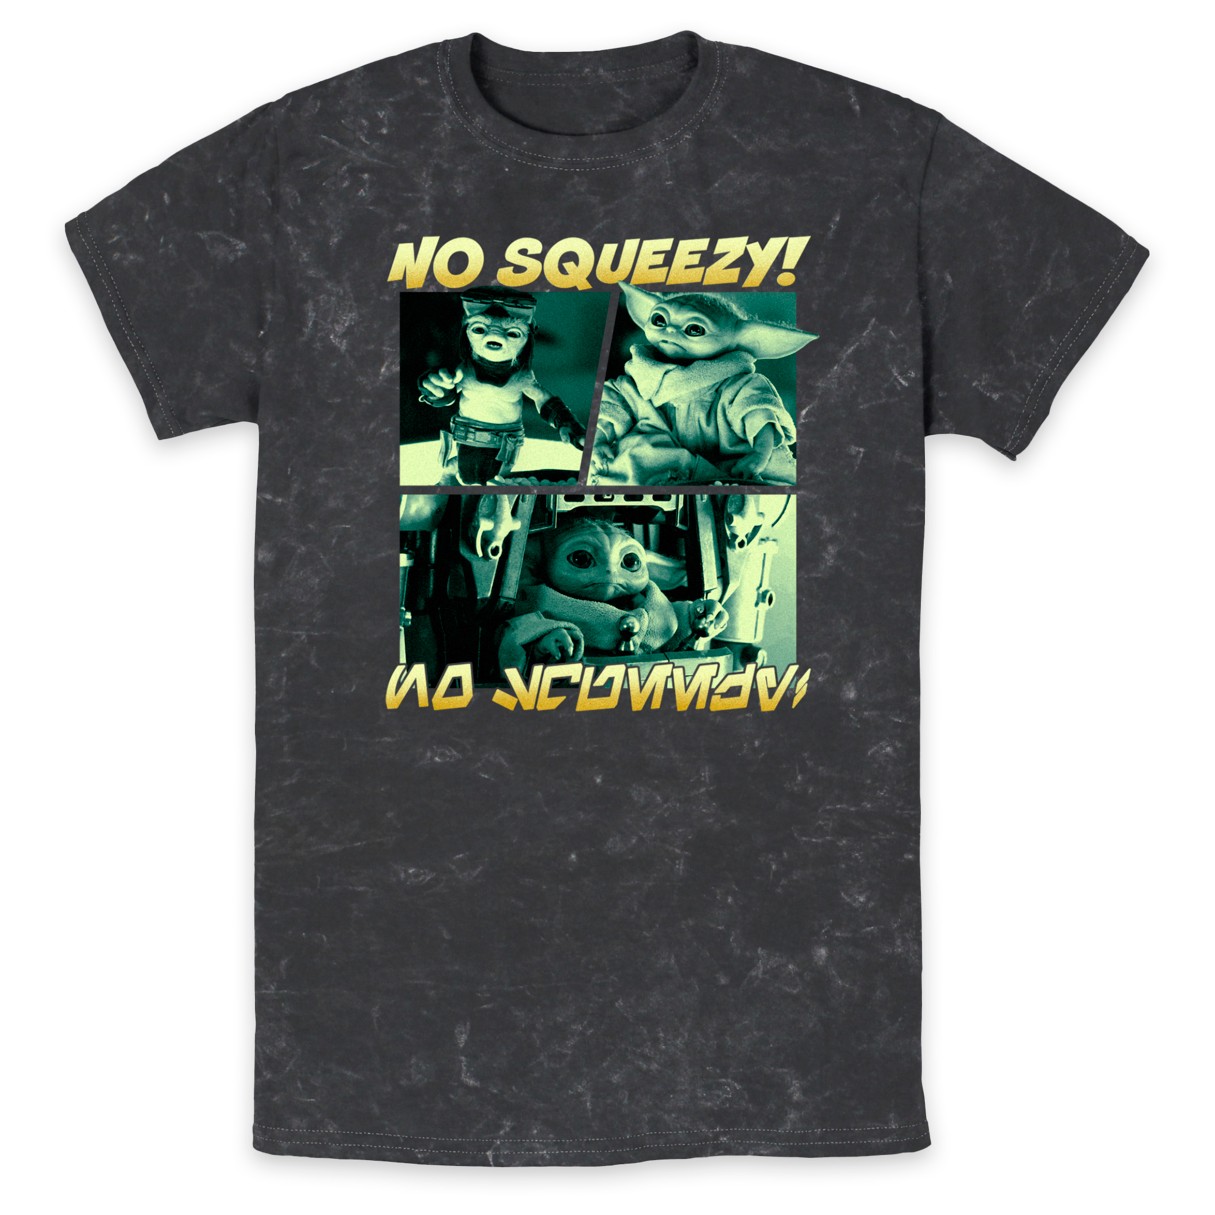 Grogu ''No Squeezy!'' T-Shirt for Adults – Star Wars: The Mandalorian